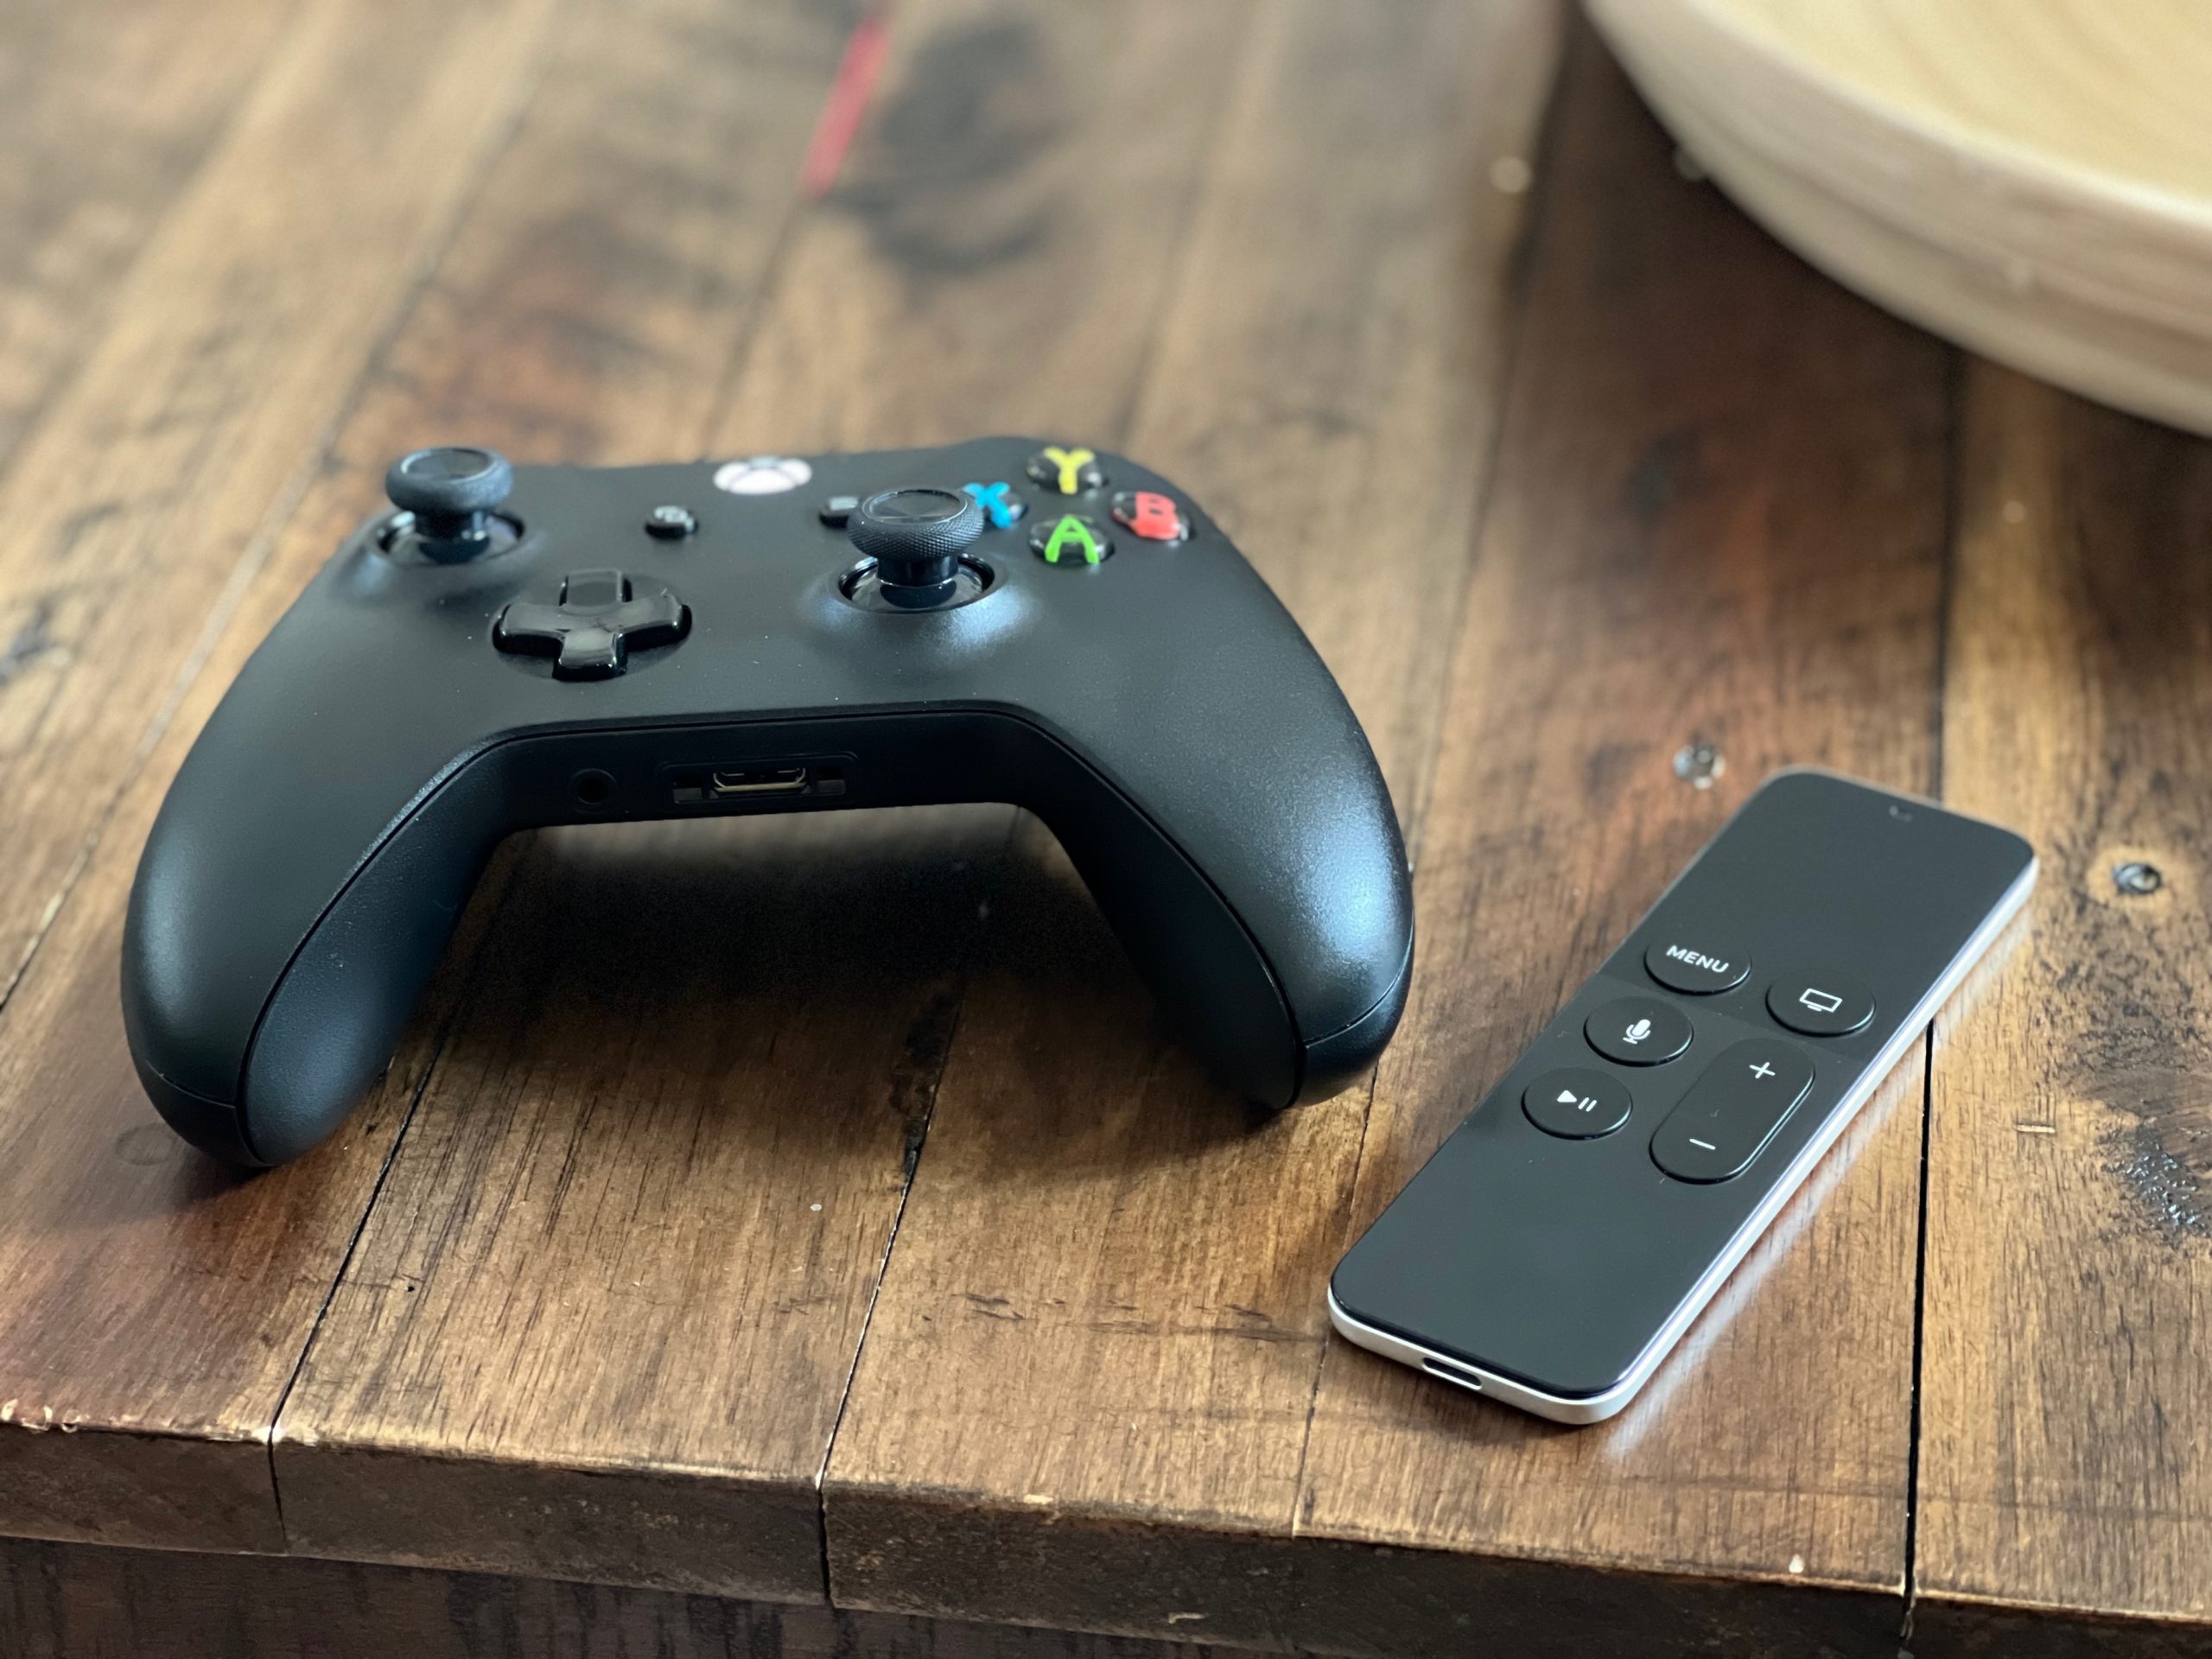 Xbox One controller and Apple TV remote